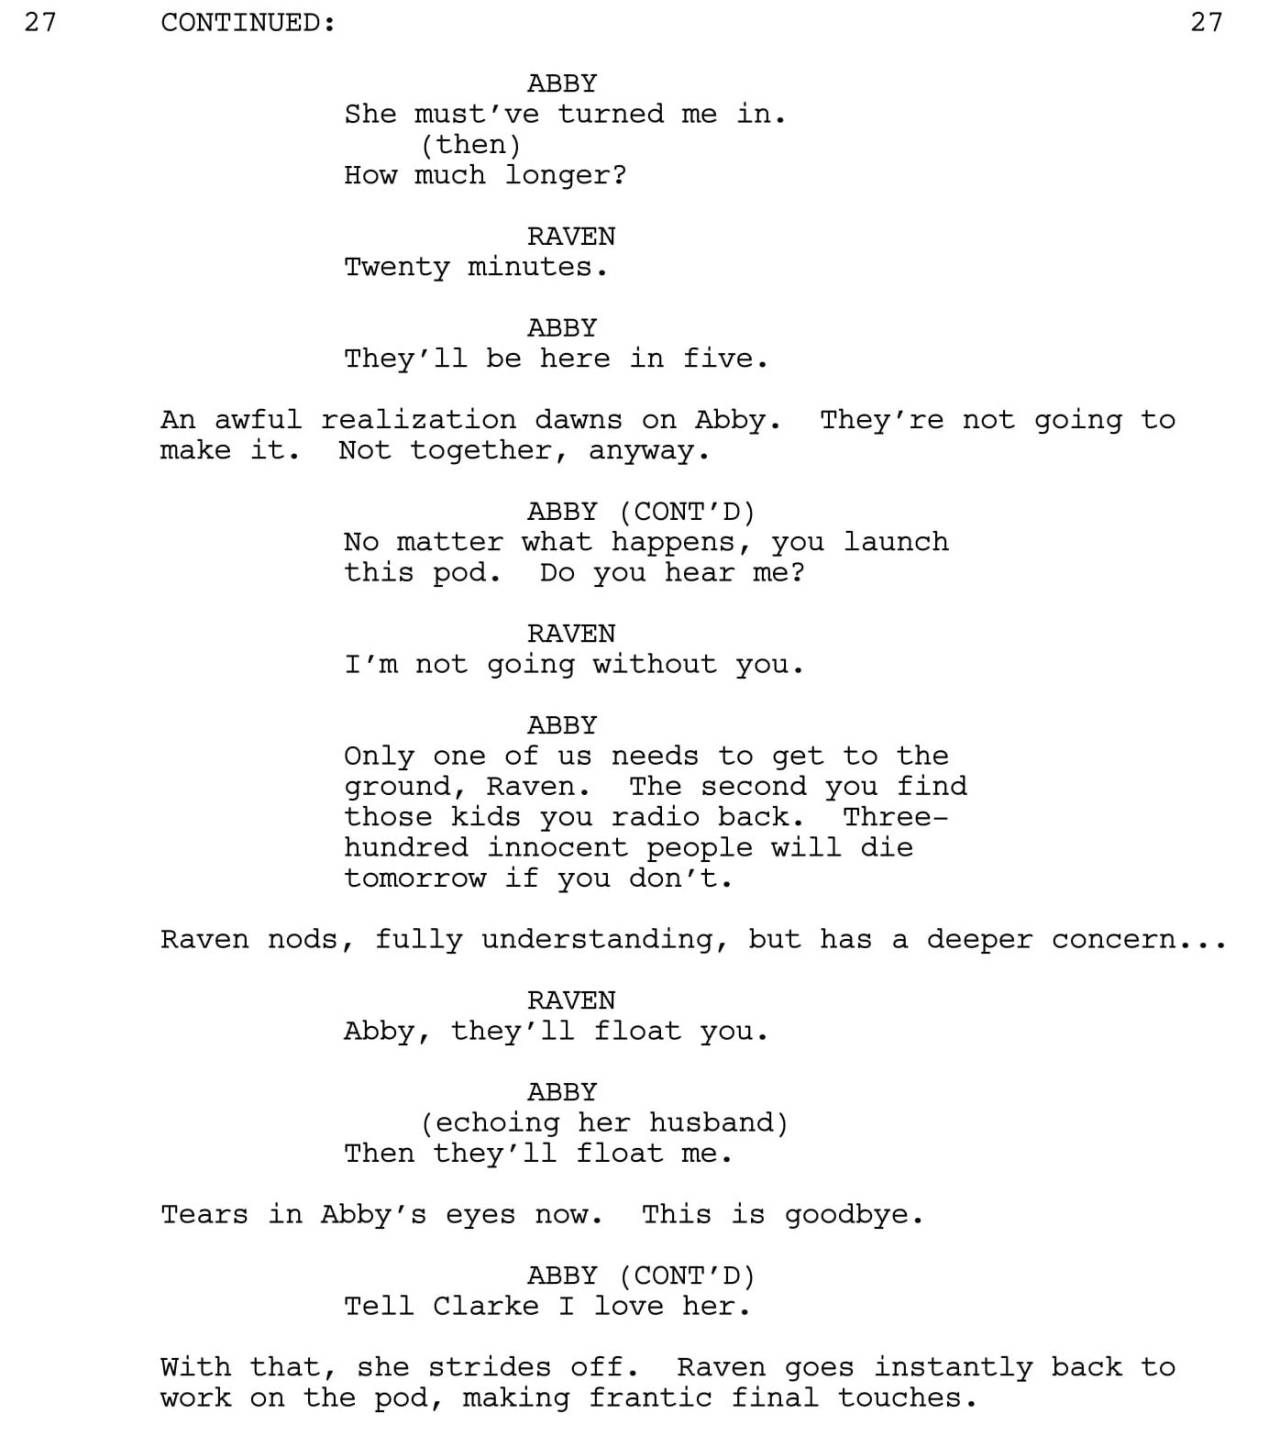 To start of this Wednesday, here’s the first scene from “Murphy’s Law” by T.J.